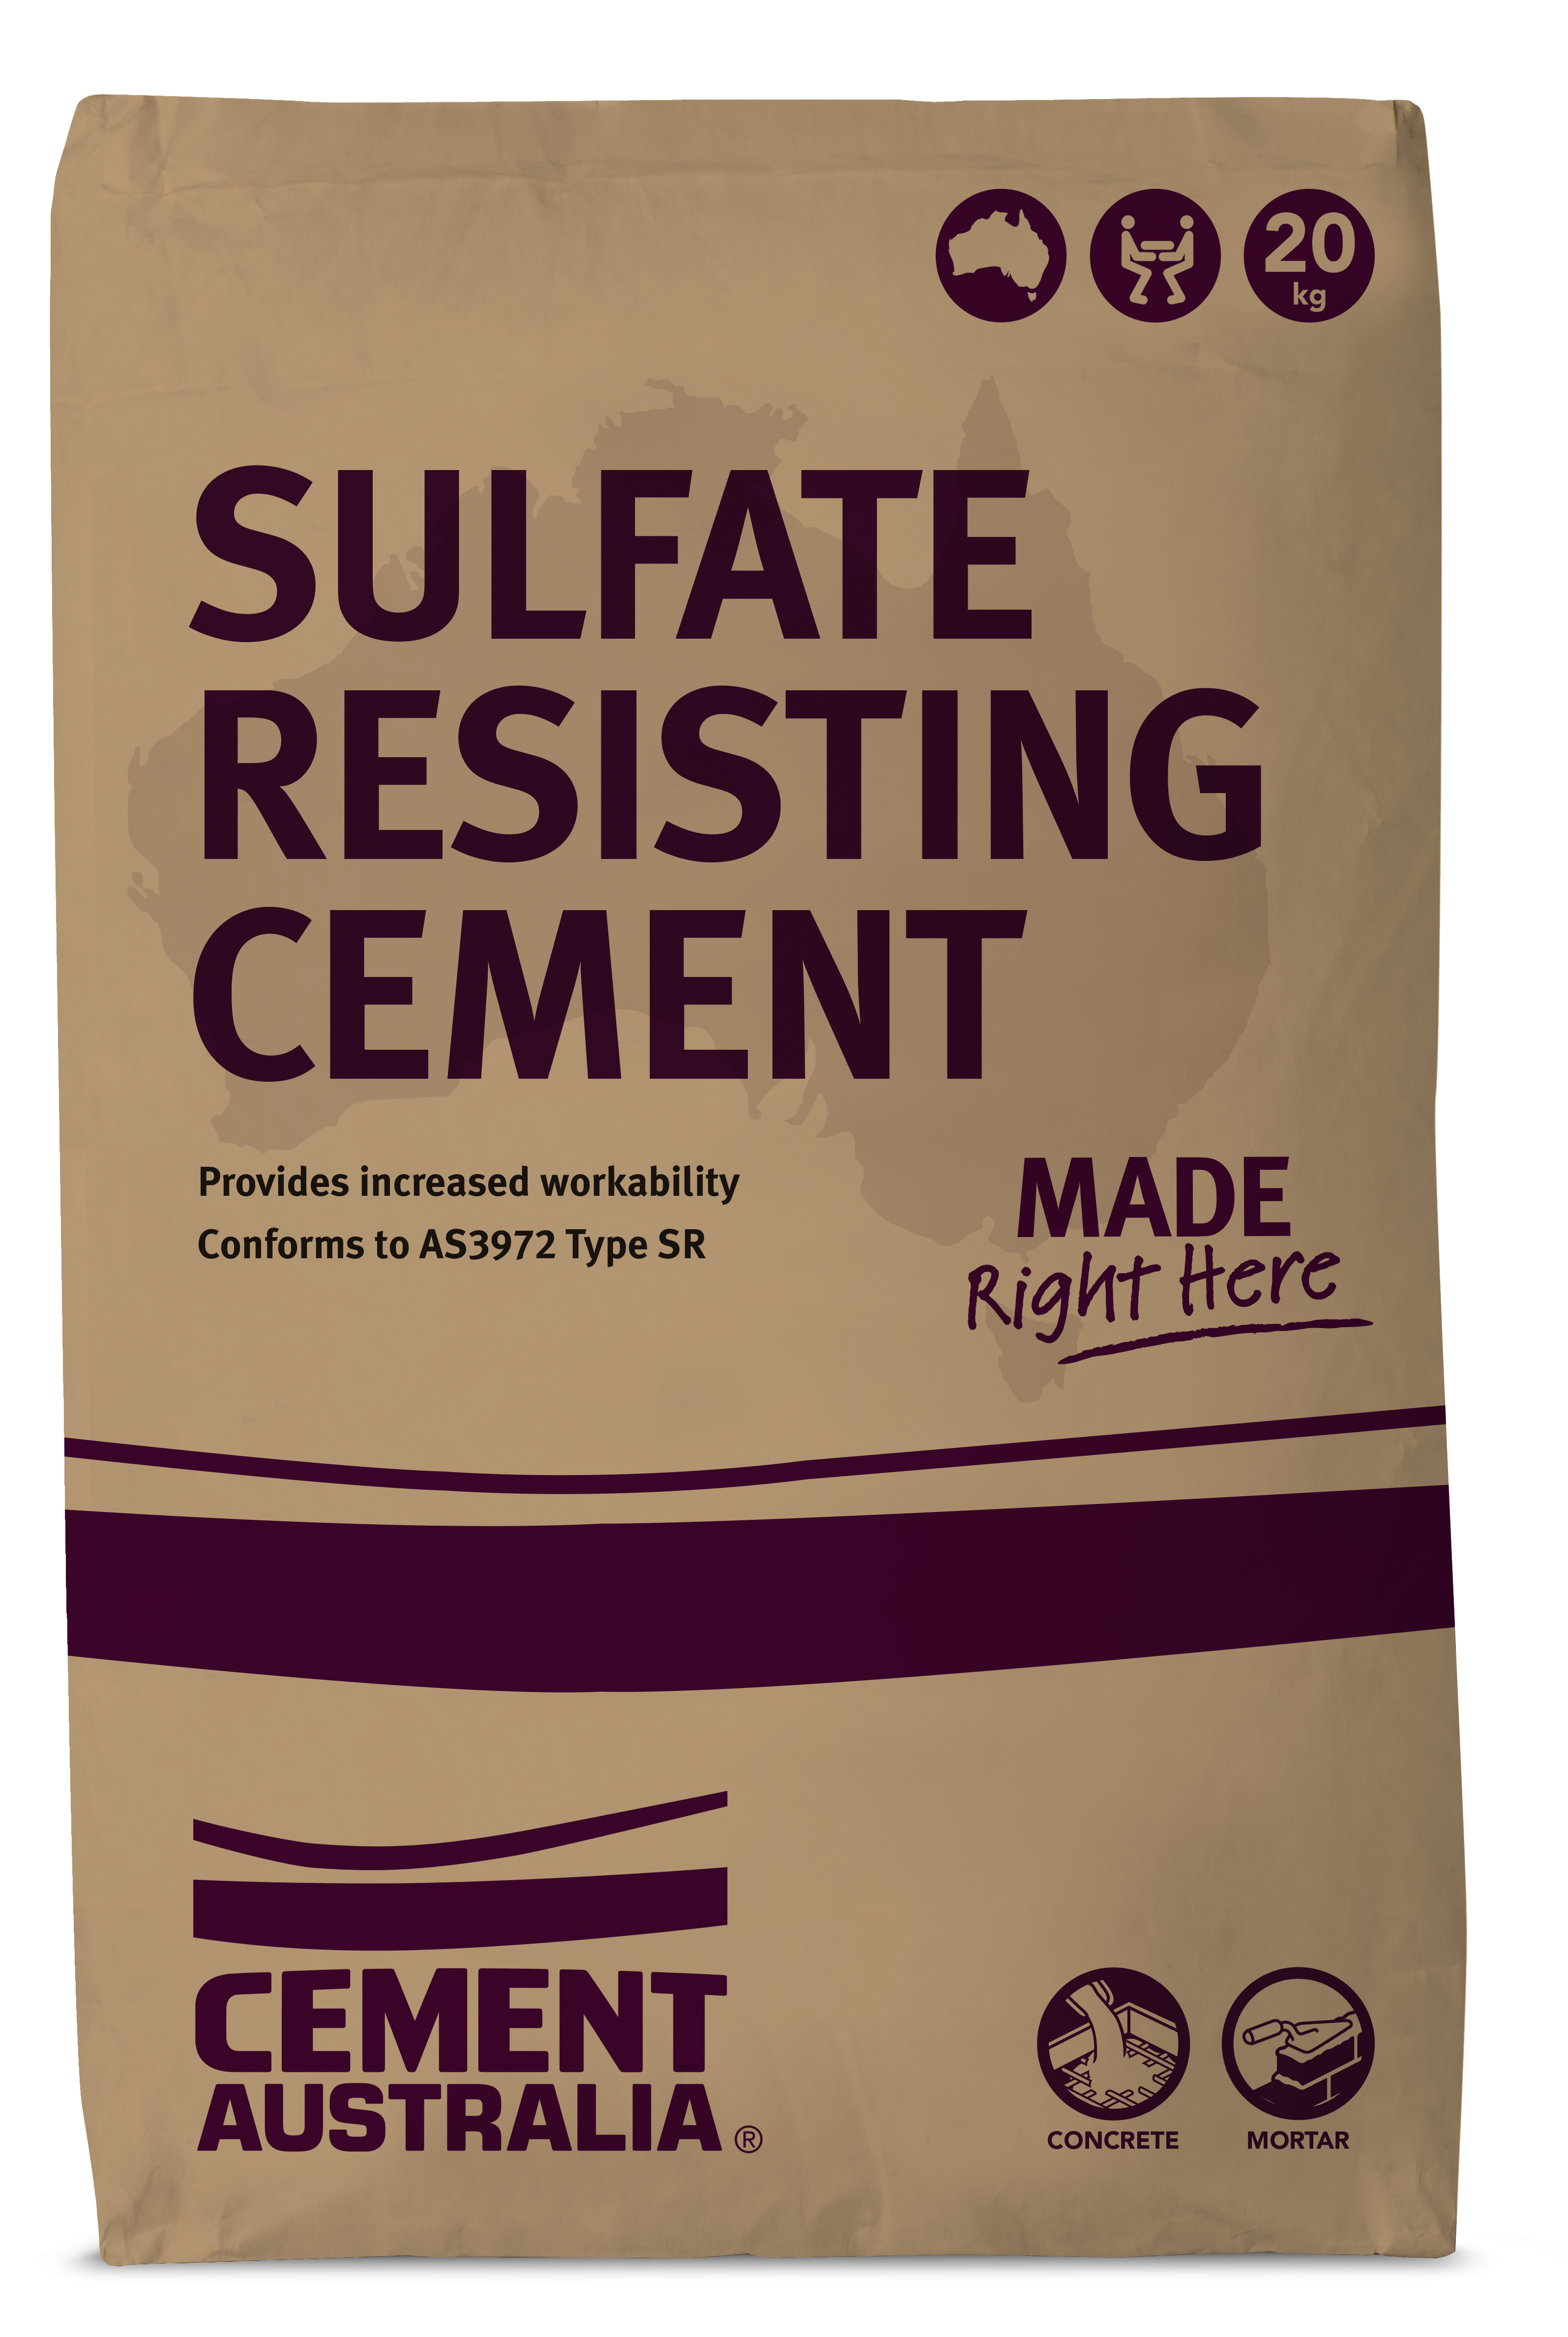 Sulfate Resisting Cement